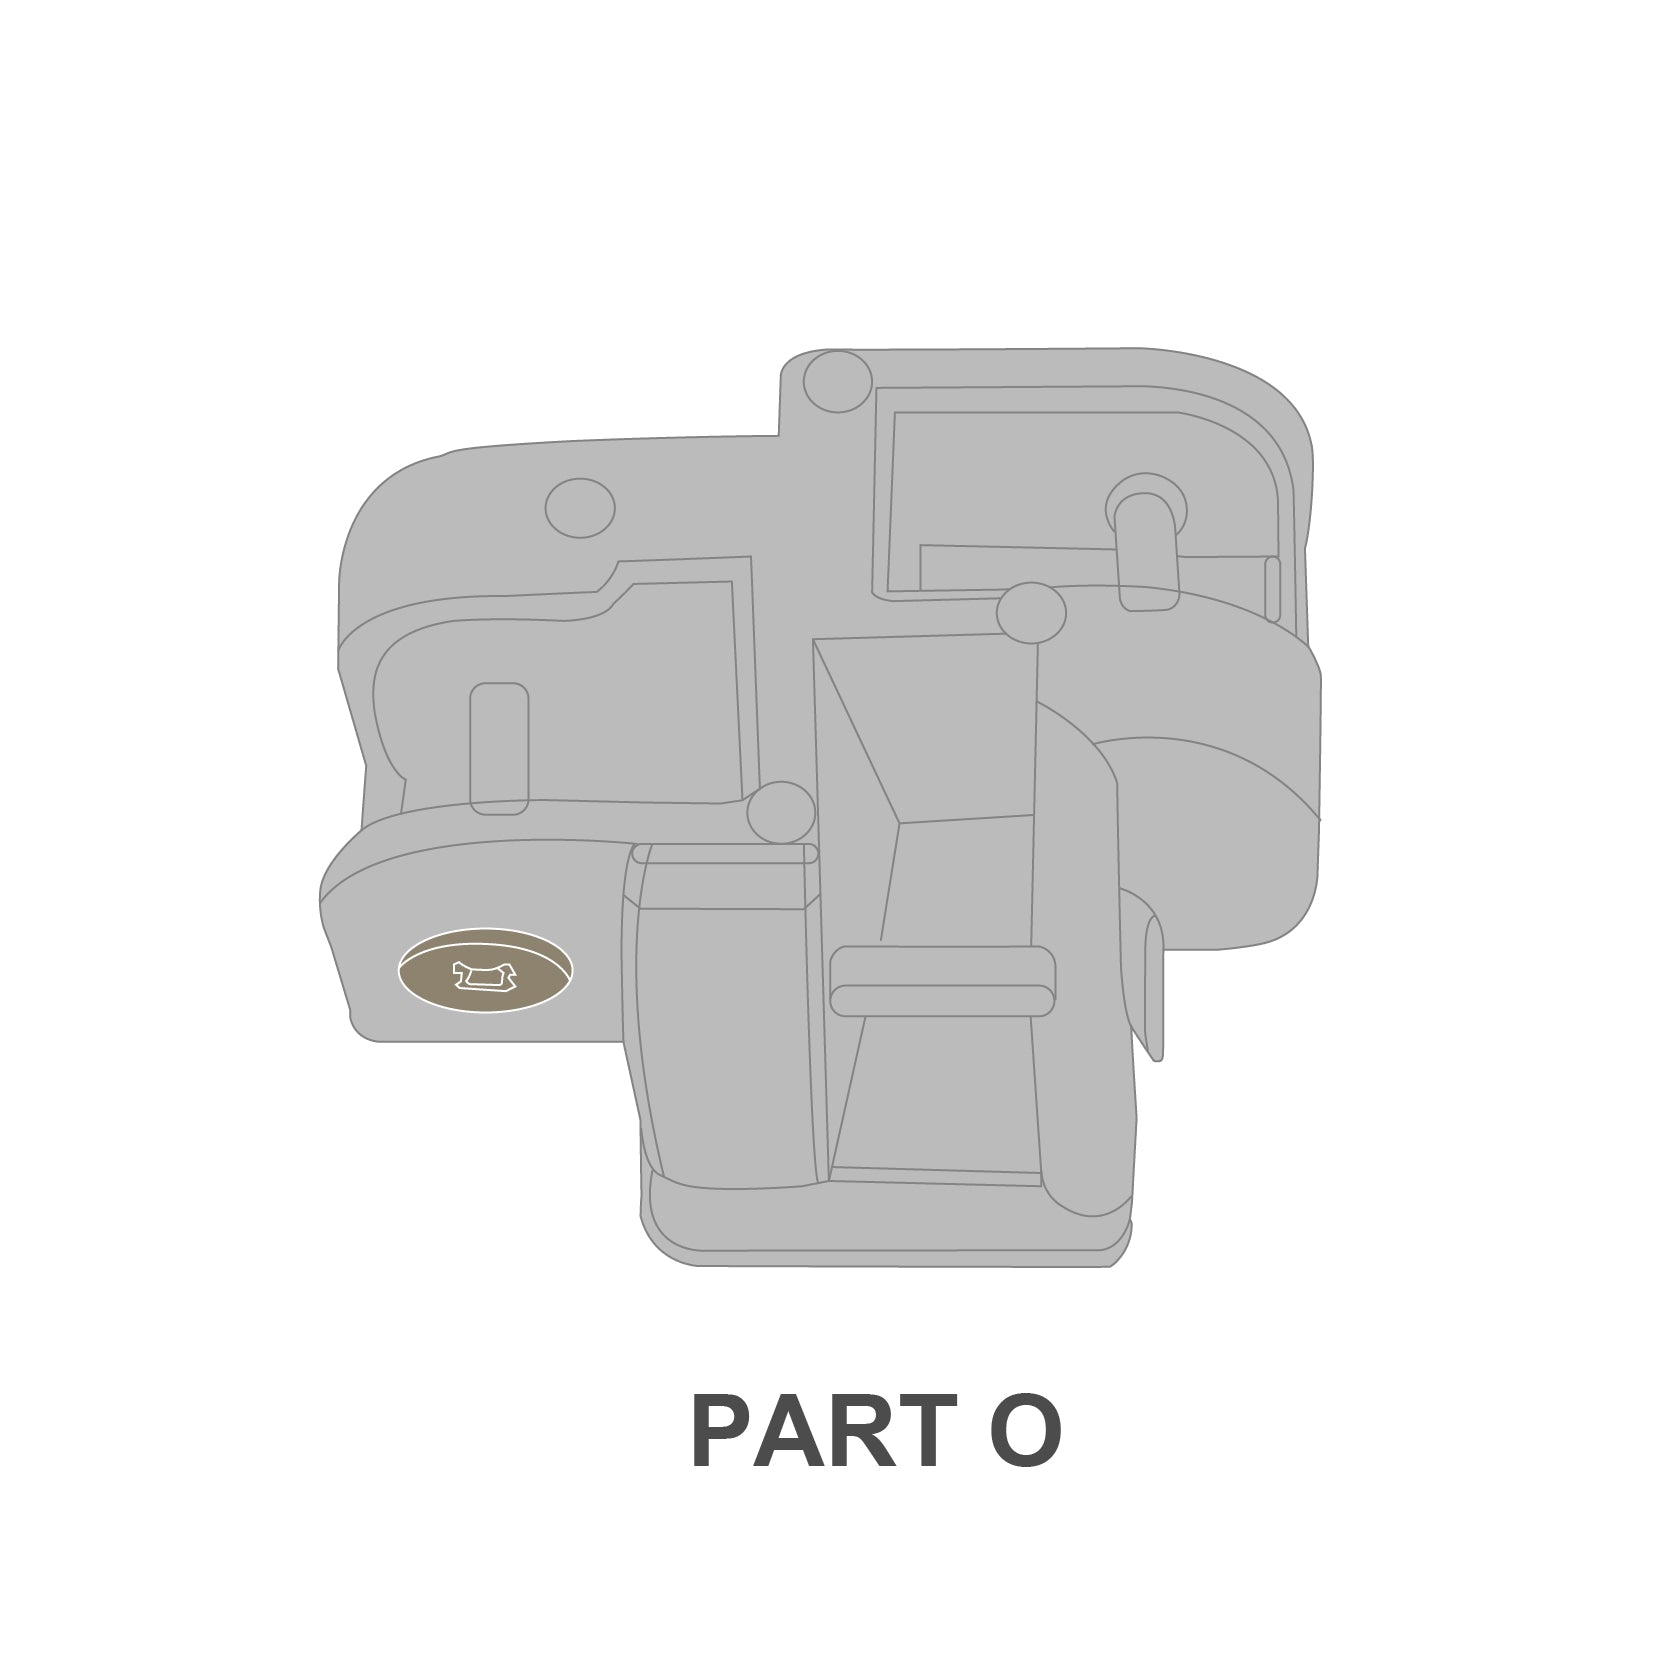 S1 Commercial individual parts